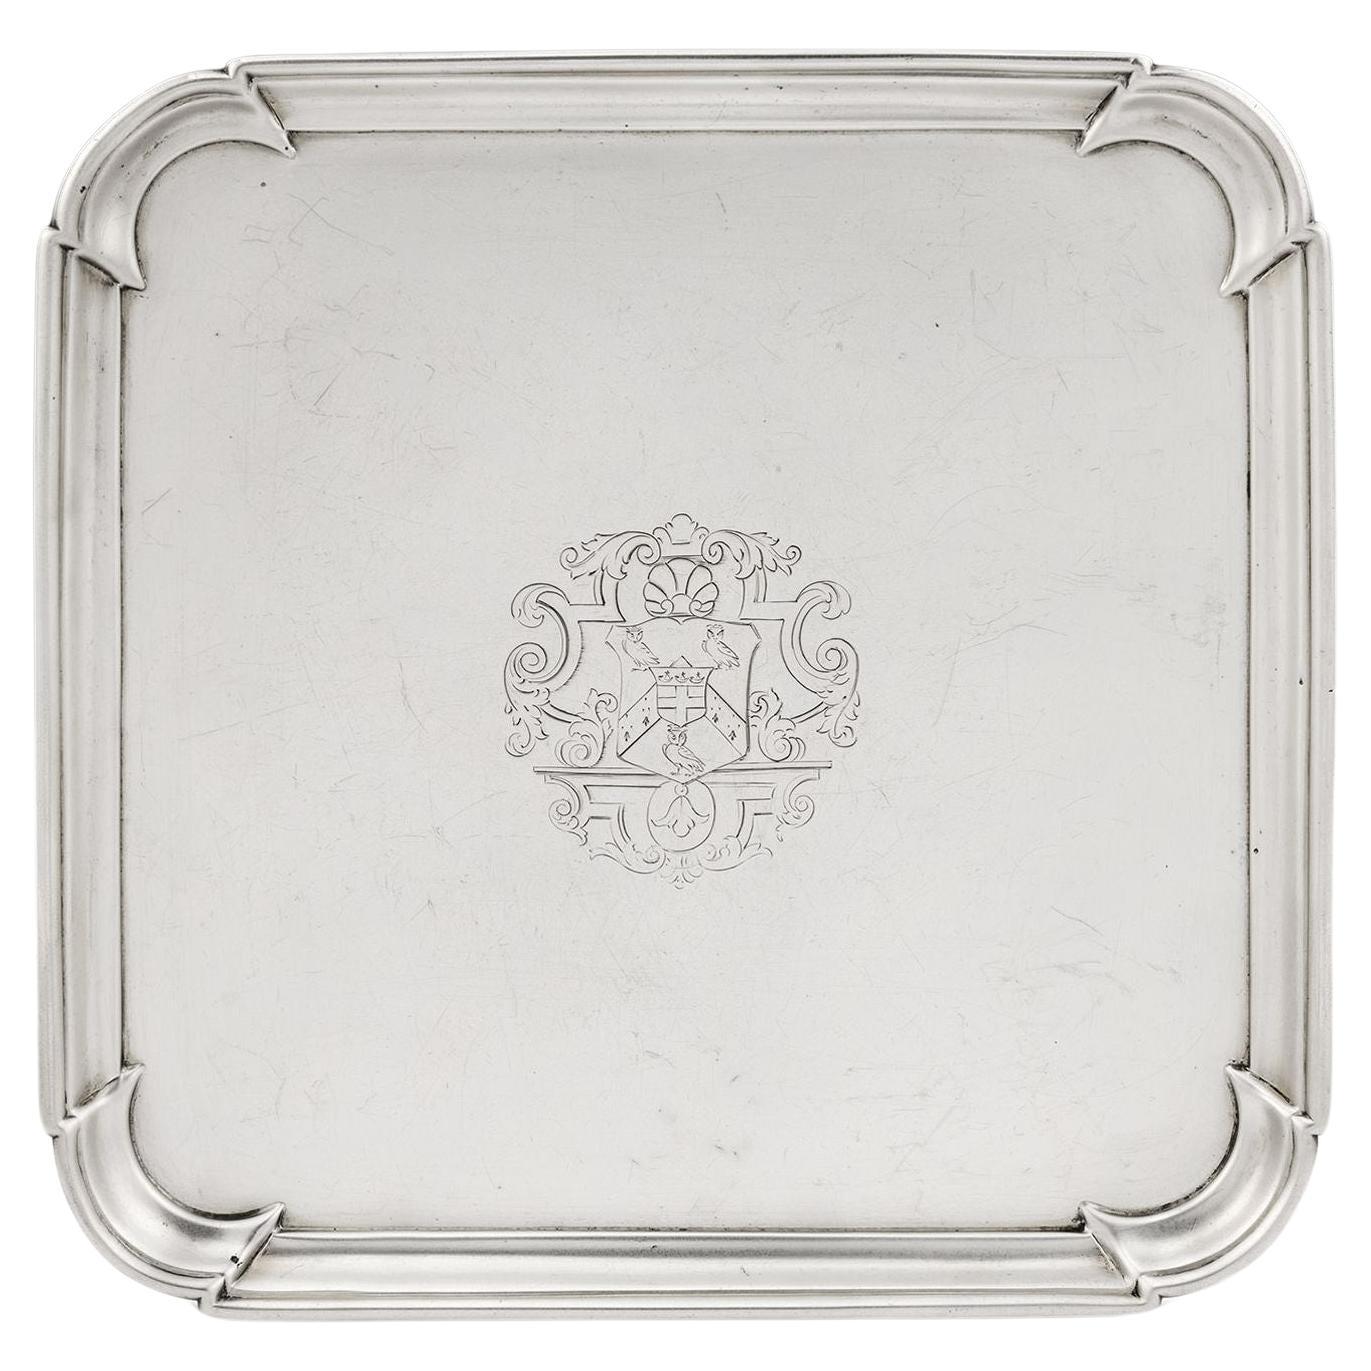 George II Square Salver Made in London by Matthew Cooper I in 1729